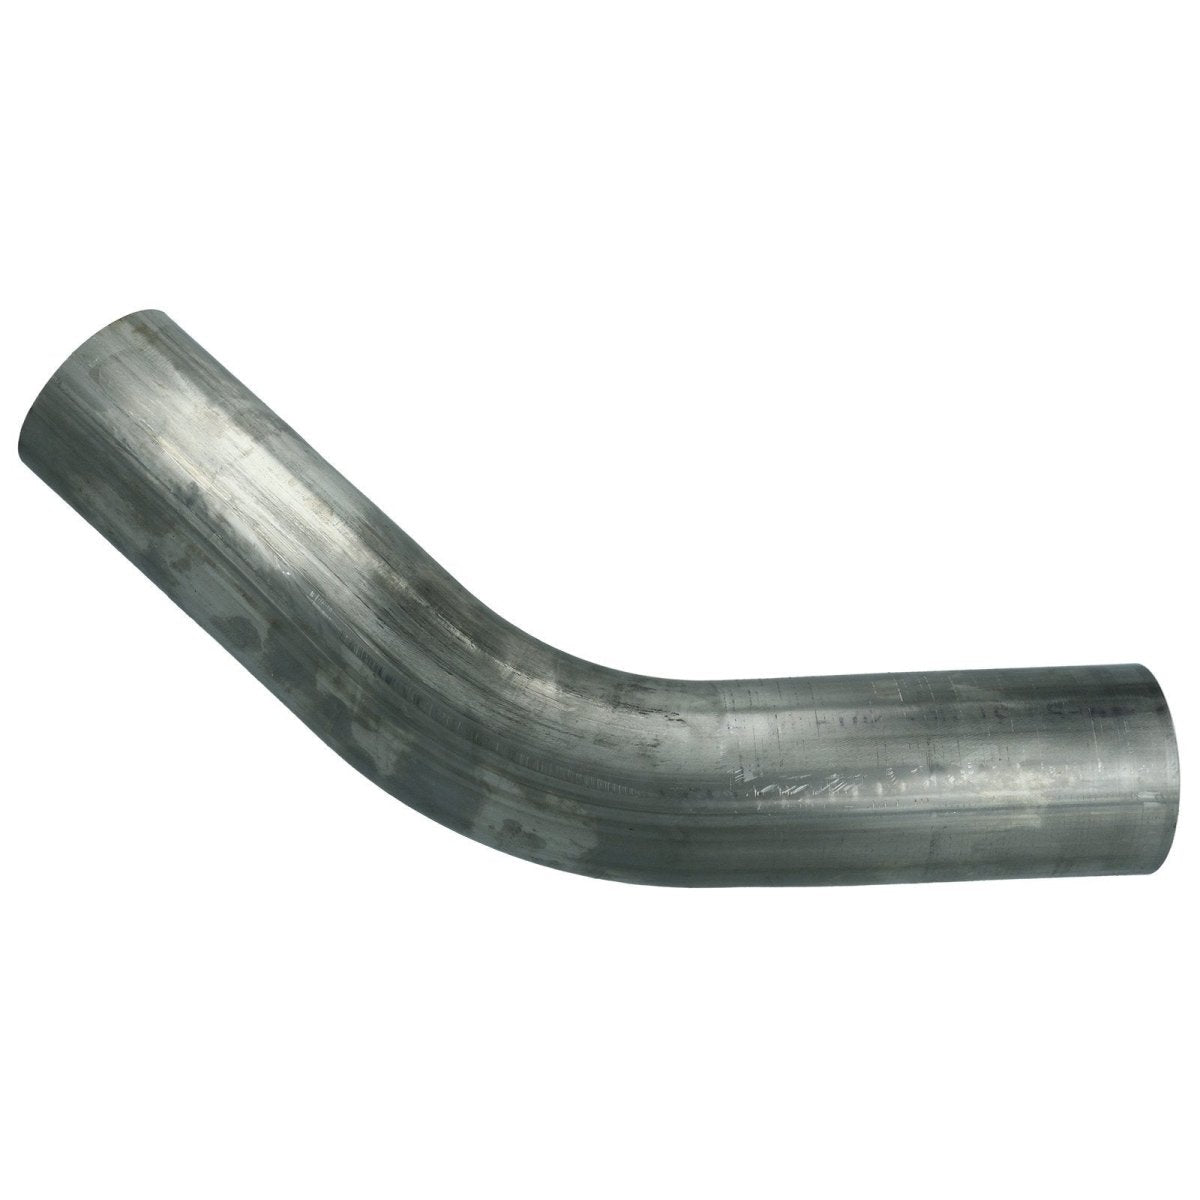 FAMEFORM 45° stainless steel pipe exhaust elbow - PARTS33 GmbH